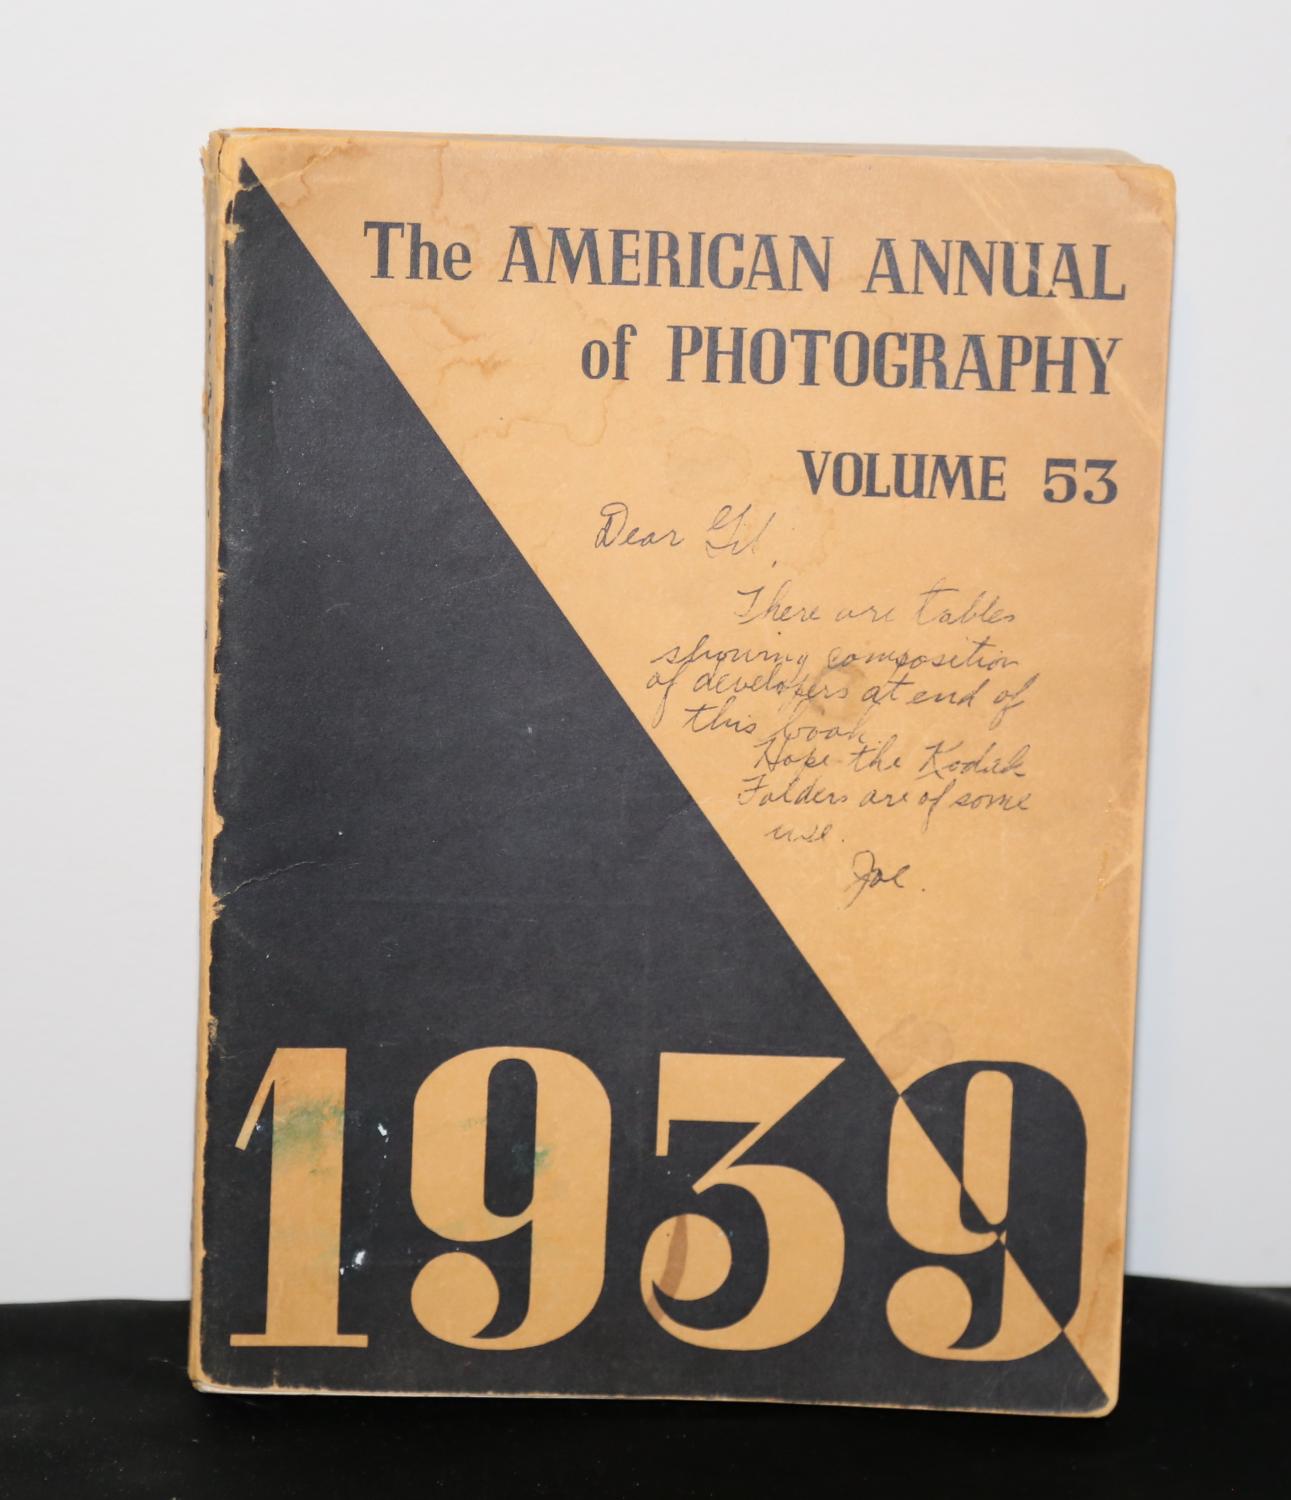 The American Annual of Photography Volume 53 by Fraprie, Frank ( editor ...